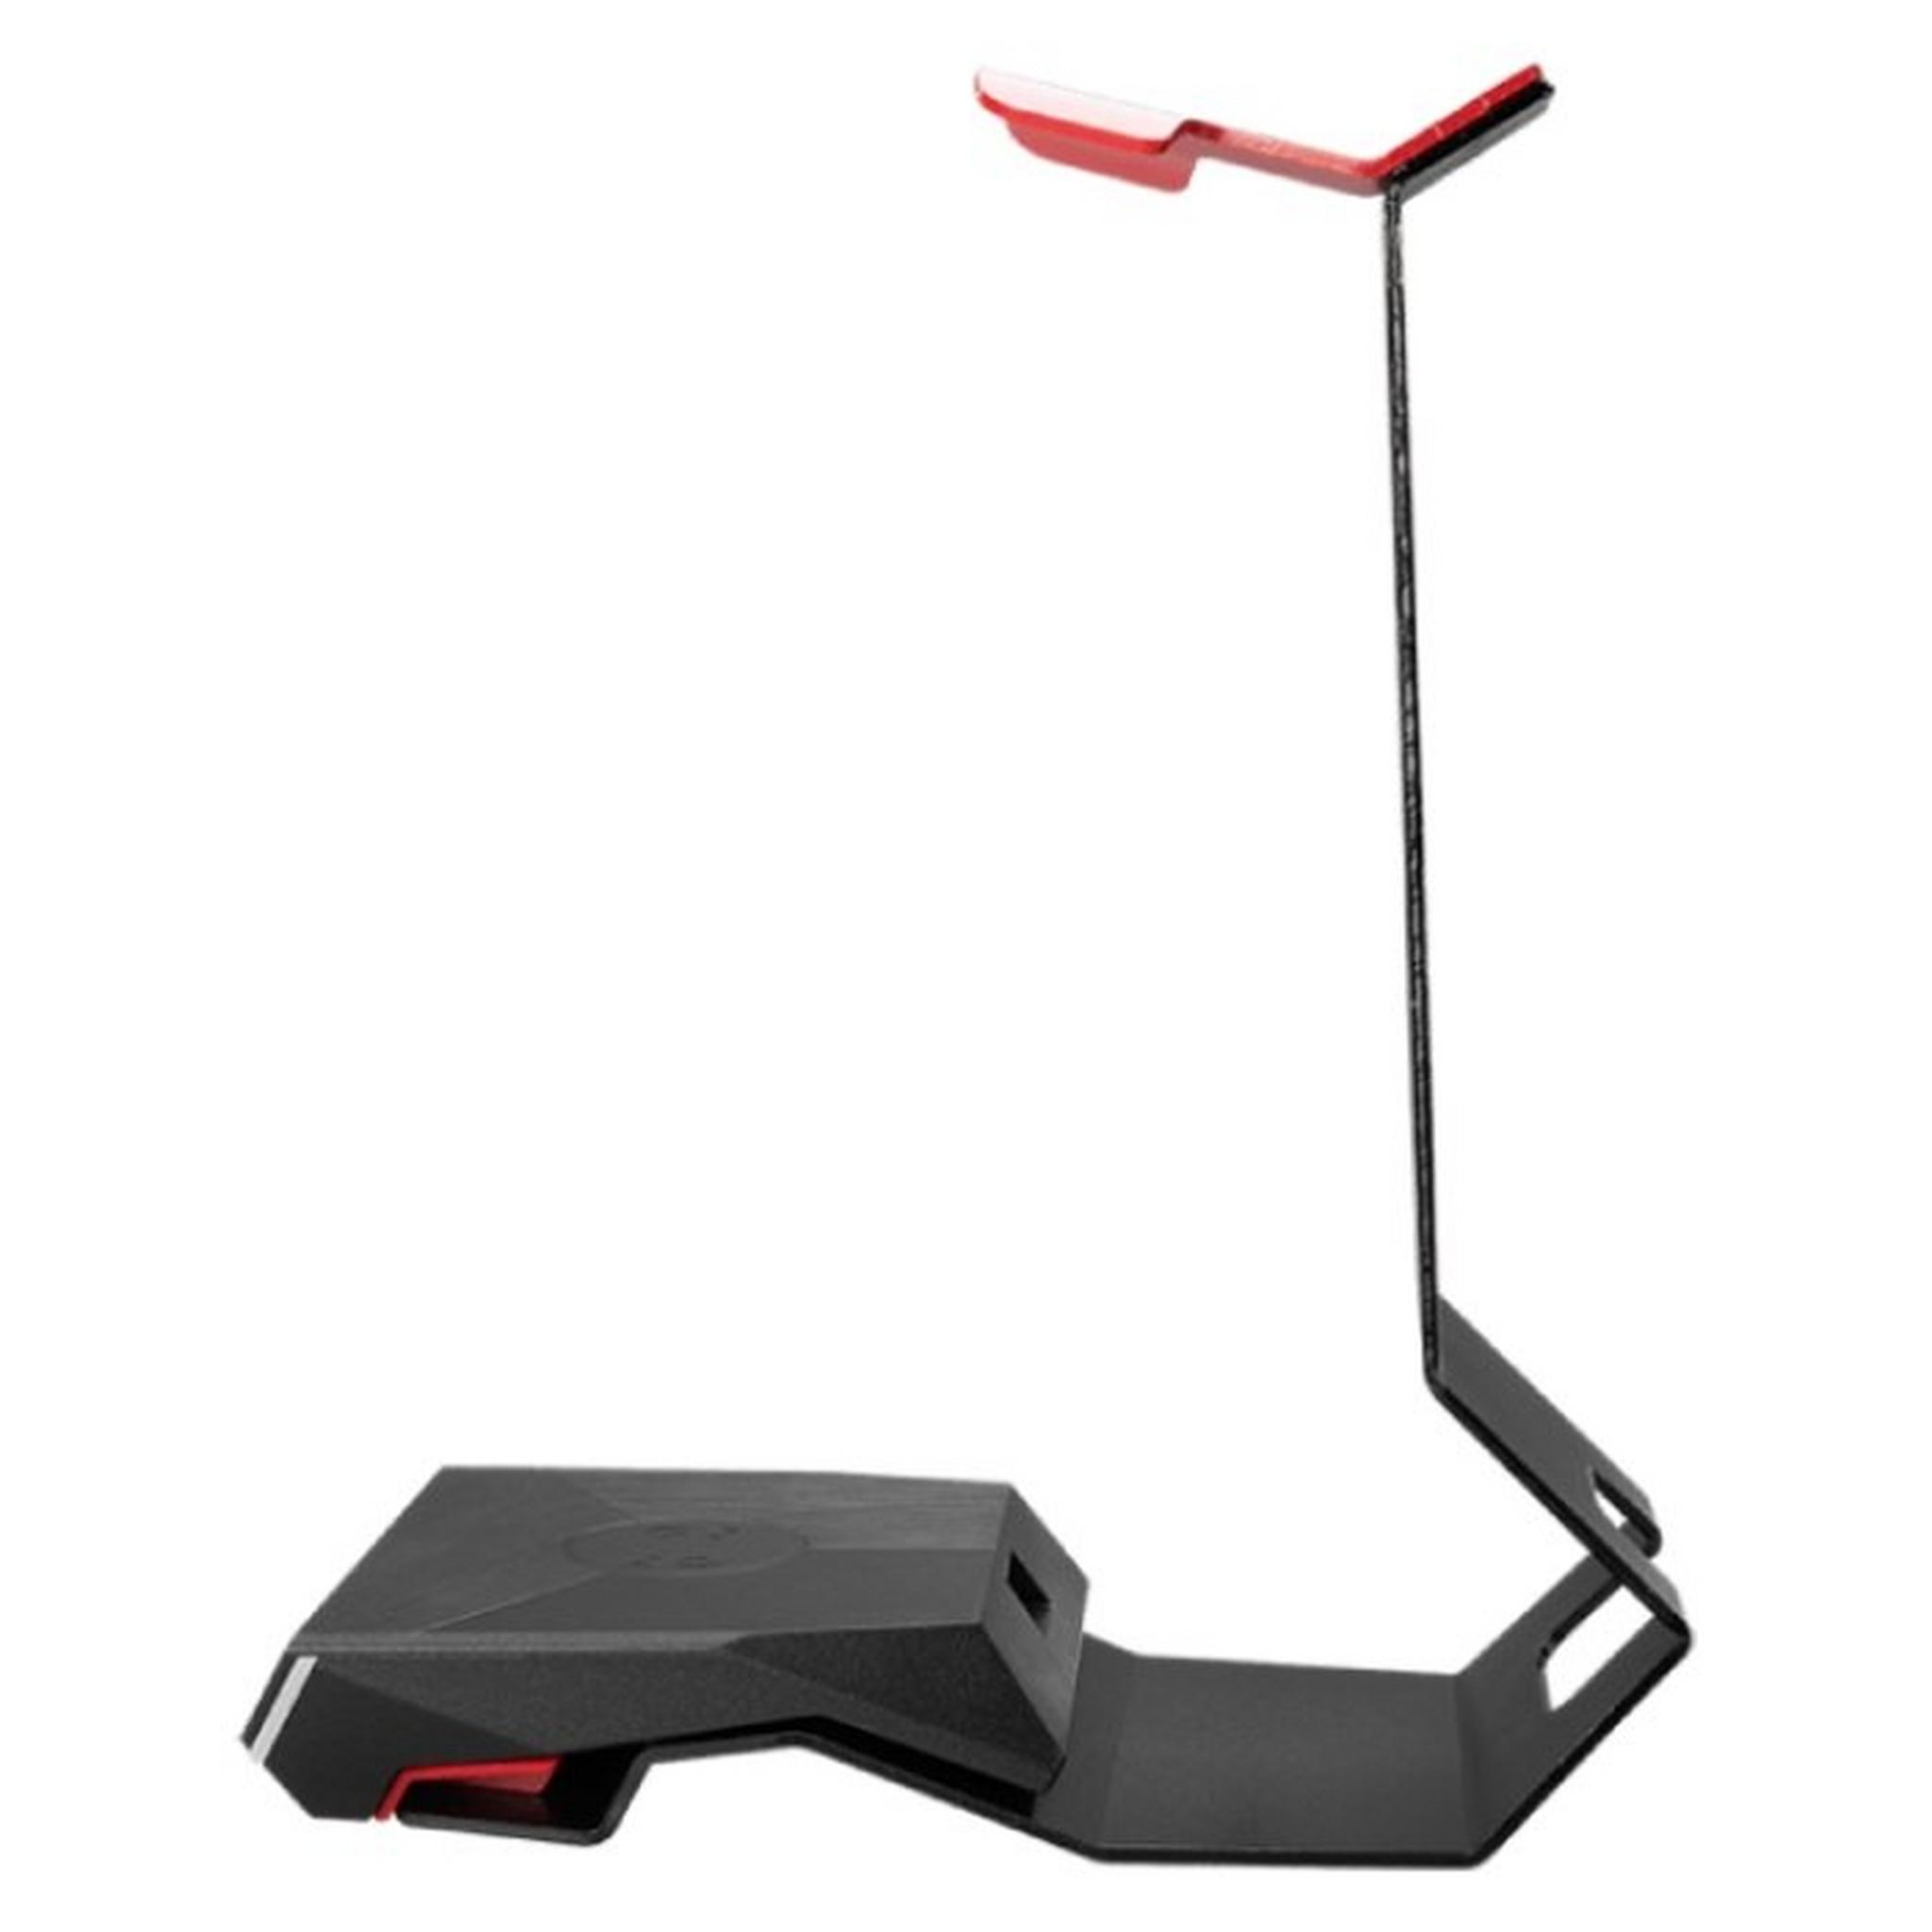 MSI Immerse HS01 Combo Gaming Headset Stand & Wireless Charger